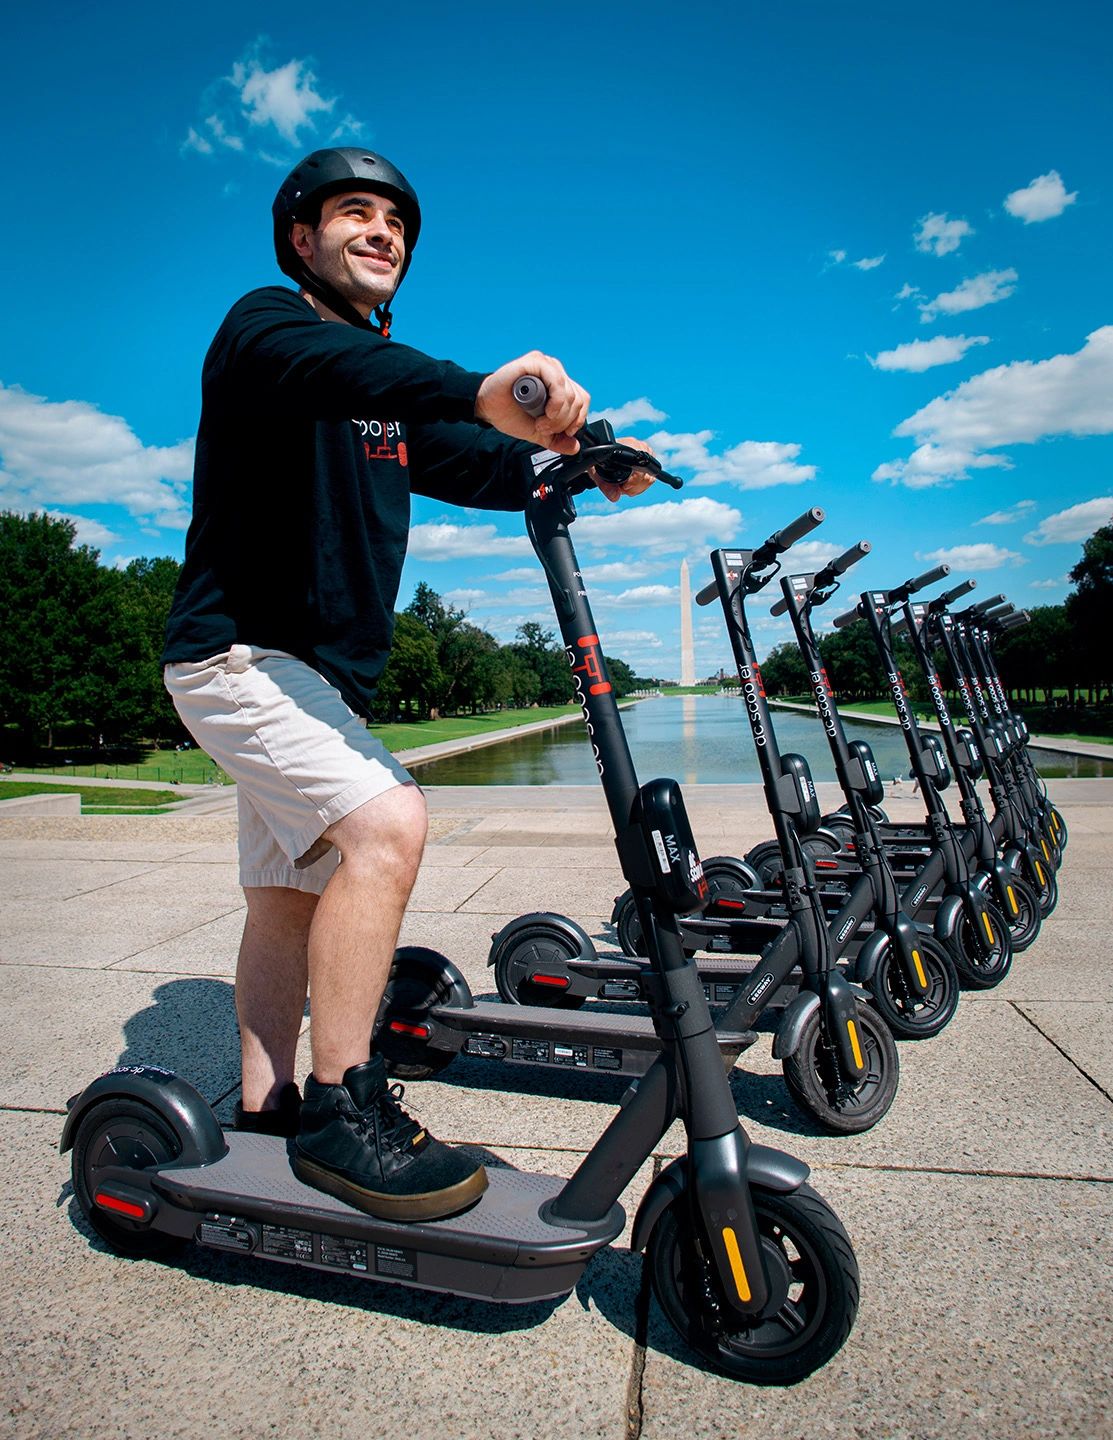 Scooter Rentals in DC - Great for Groups!